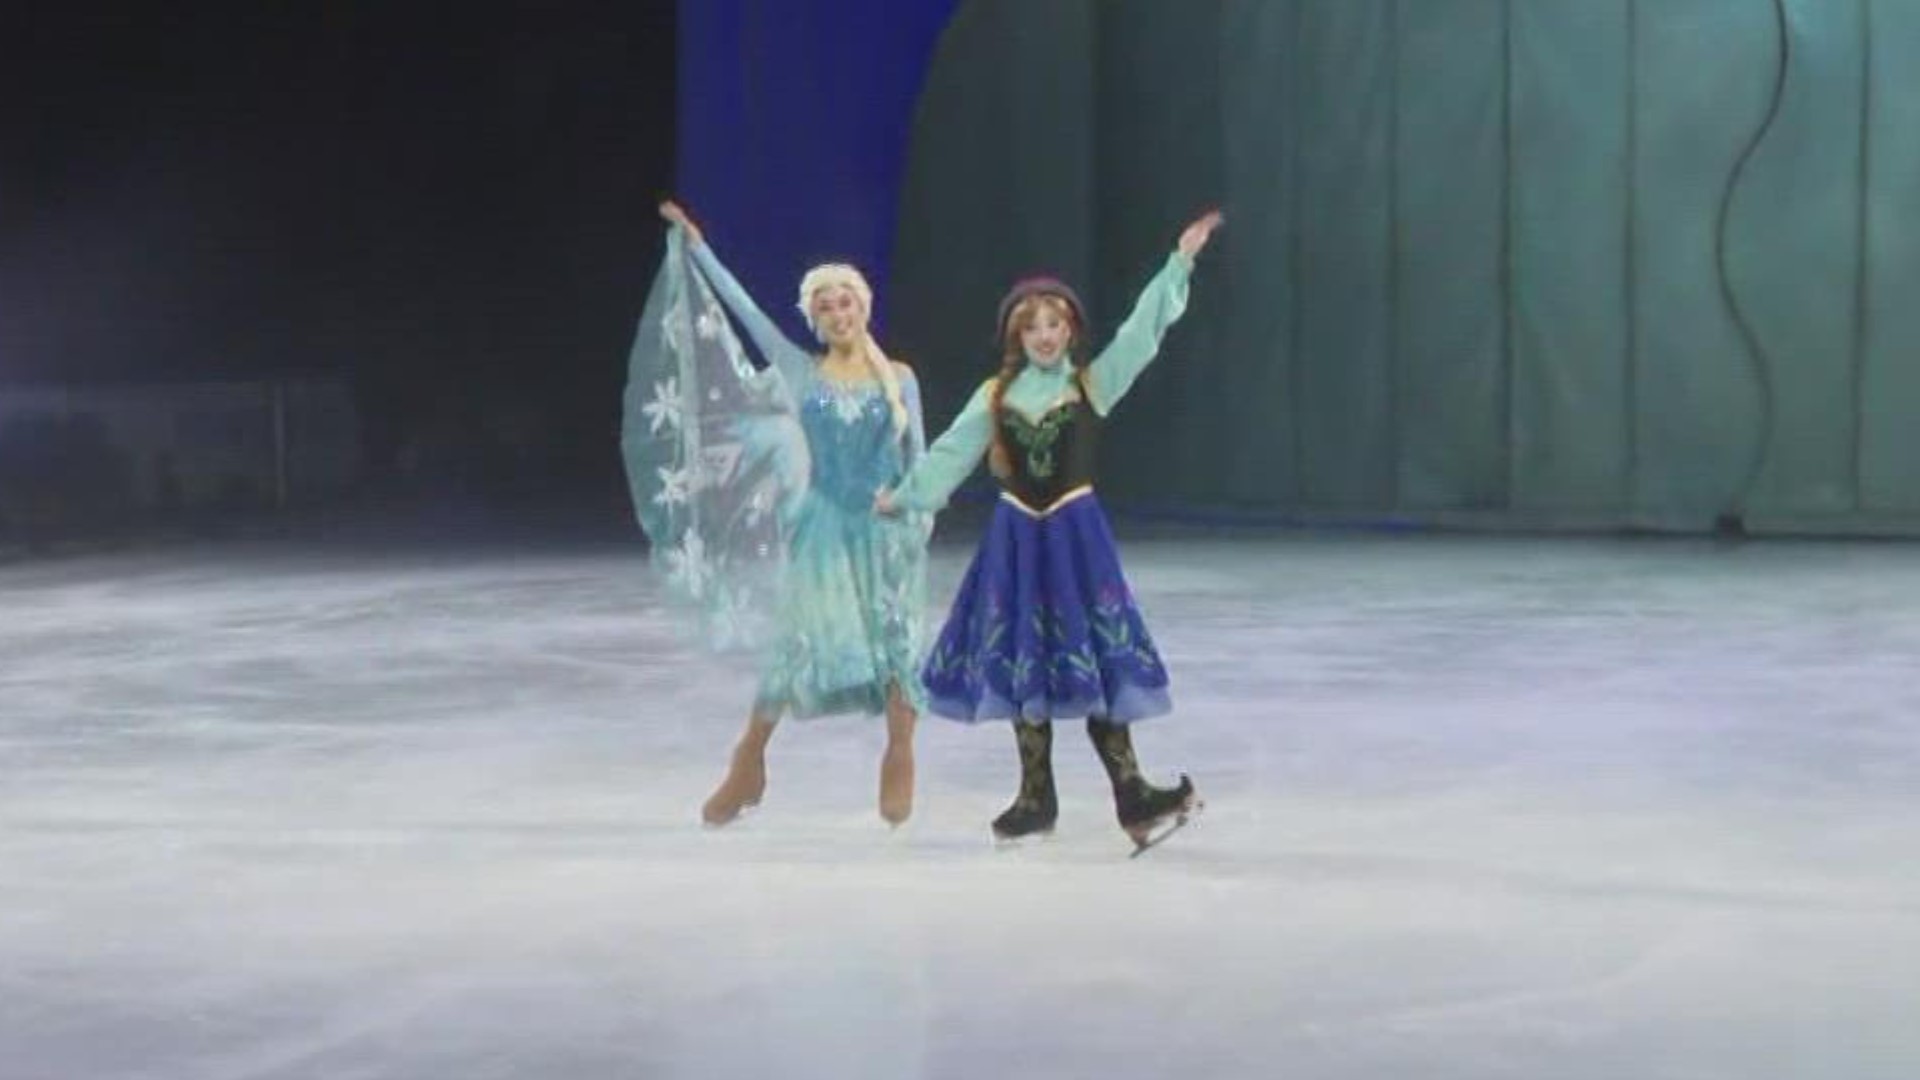 Disney on Ice magic arrives in Buffalo at the Keybank Center